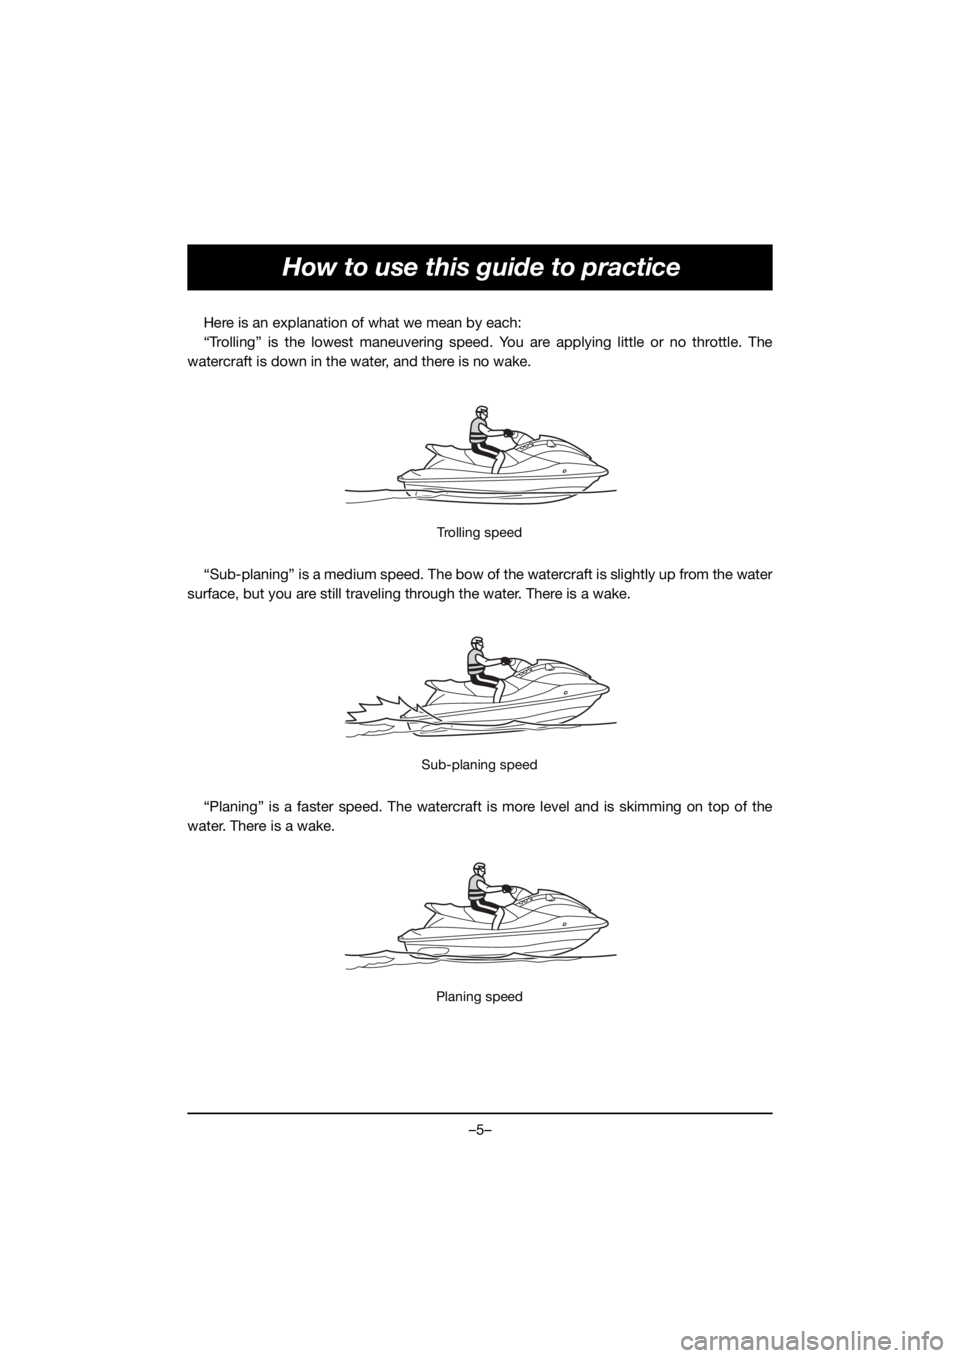 YAMAHA VX CRUISER HO 2020  Owners Manual –5–
How to use this guide to practice
Here is an explanation of what we mean by each:
“Trolling” is the lowest maneuvering speed. You are applying little or no throttle. The
watercraft is down